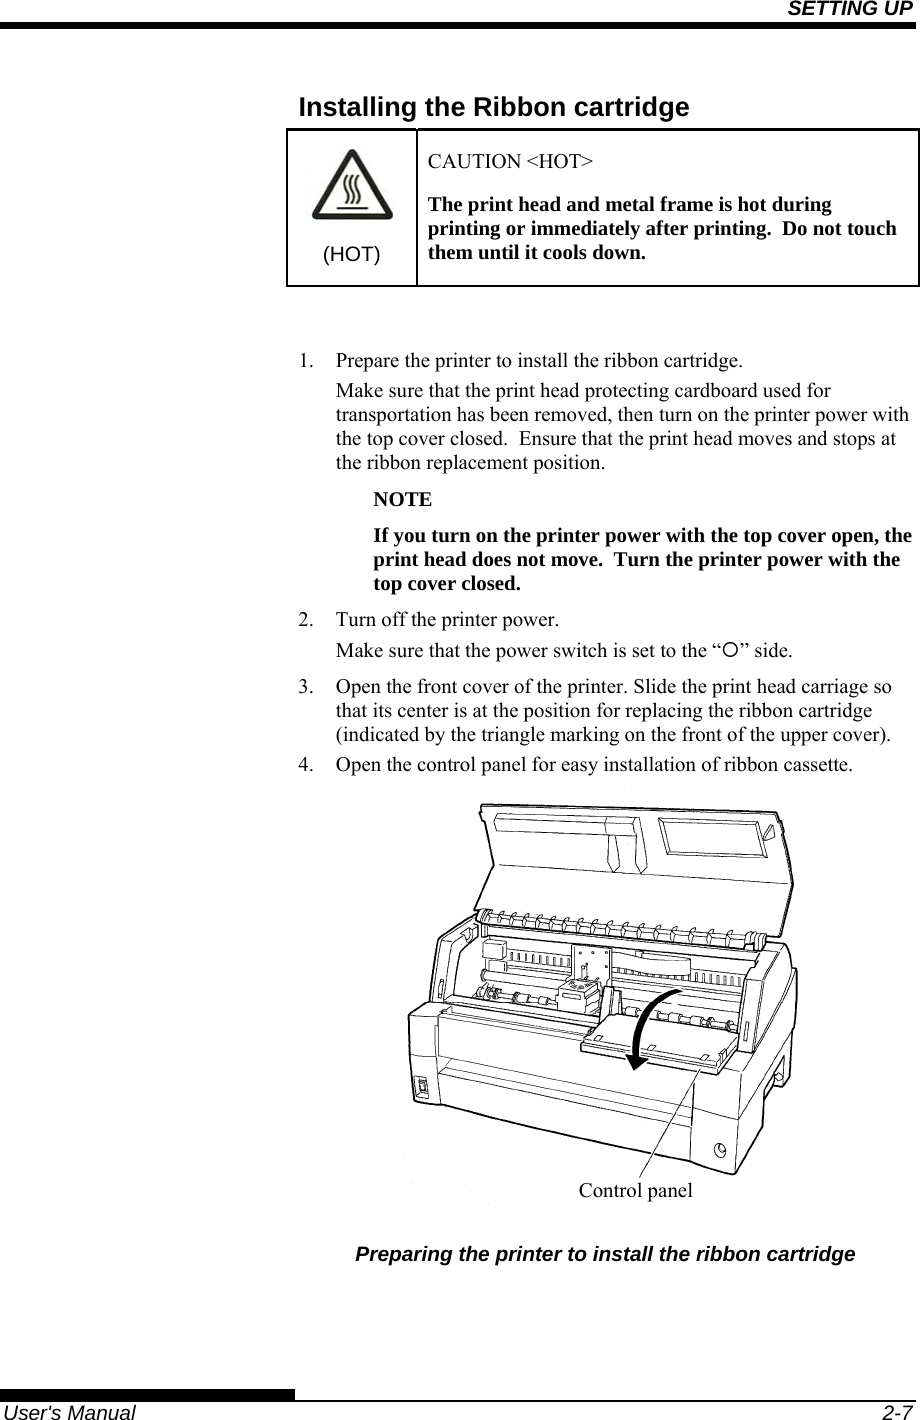 SETTING UP   User&apos;s Manual  2-7 Installing the Ribbon cartridge (HOT) CAUTION &lt;HOT&gt; The print head and metal frame is hot during printing or immediately after printing.  Do not touch them until it cools down.  1.  Prepare the printer to install the ribbon cartridge. Make sure that the print head protecting cardboard used for transportation has been removed, then turn on the printer power with the top cover closed.  Ensure that the print head moves and stops at the ribbon replacement position. NOTE If you turn on the printer power with the top cover open, the print head does not move.  Turn the printer power with the top cover closed. 2.  Turn off the printer power. Make sure that the power switch is set to the “{” side. 3. Open the front cover of the printer. Slide the print head carriage so that its center is at the position for replacing the ribbon cartridge (indicated by the triangle marking on the front of the upper cover). 4. Open the control panel for easy installation of ribbon cassette.  Preparing the printer to install the ribbon cartridge  Control panel 